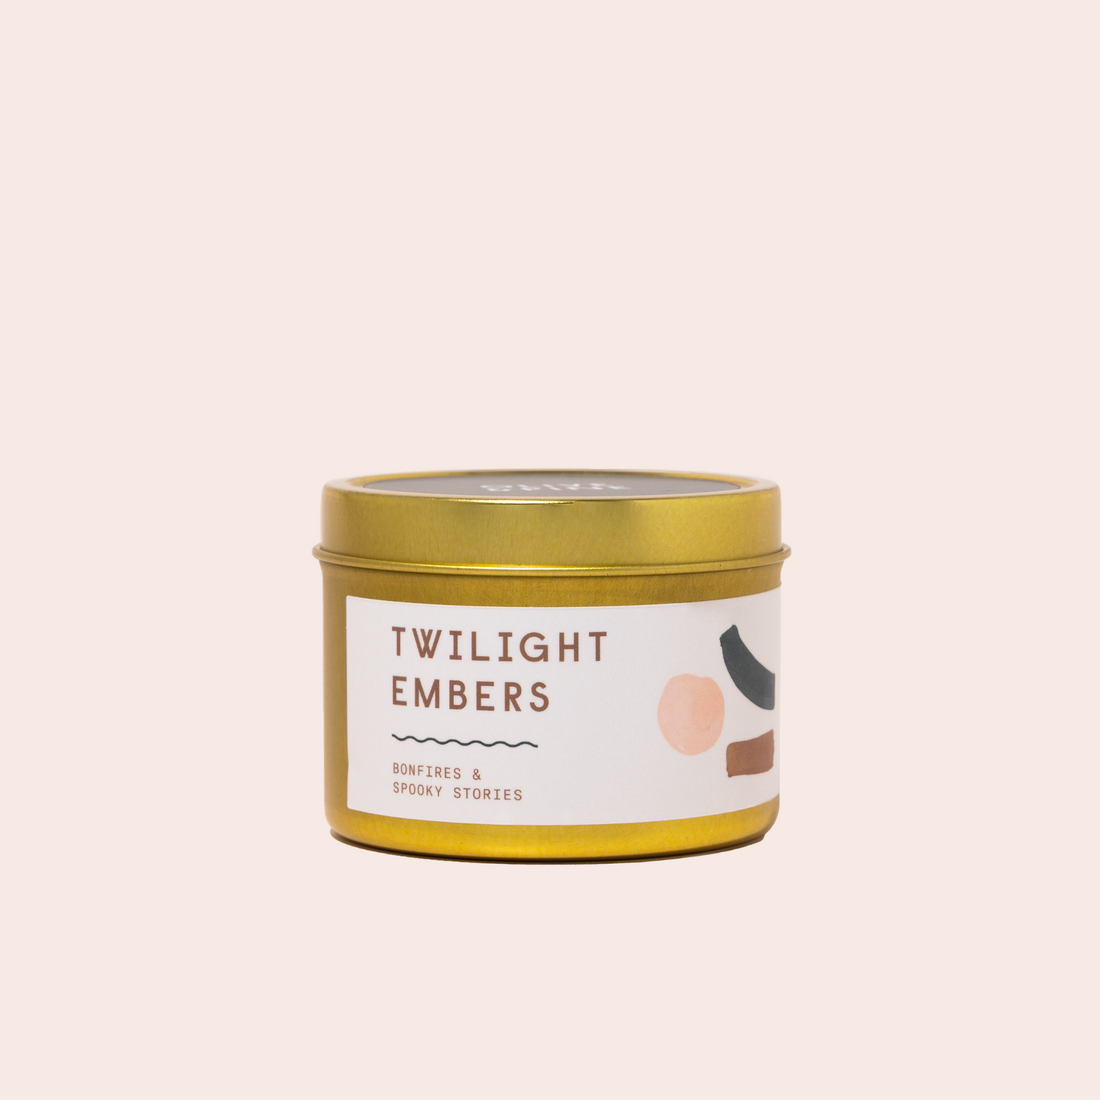 Twilight Embers Travel Candle